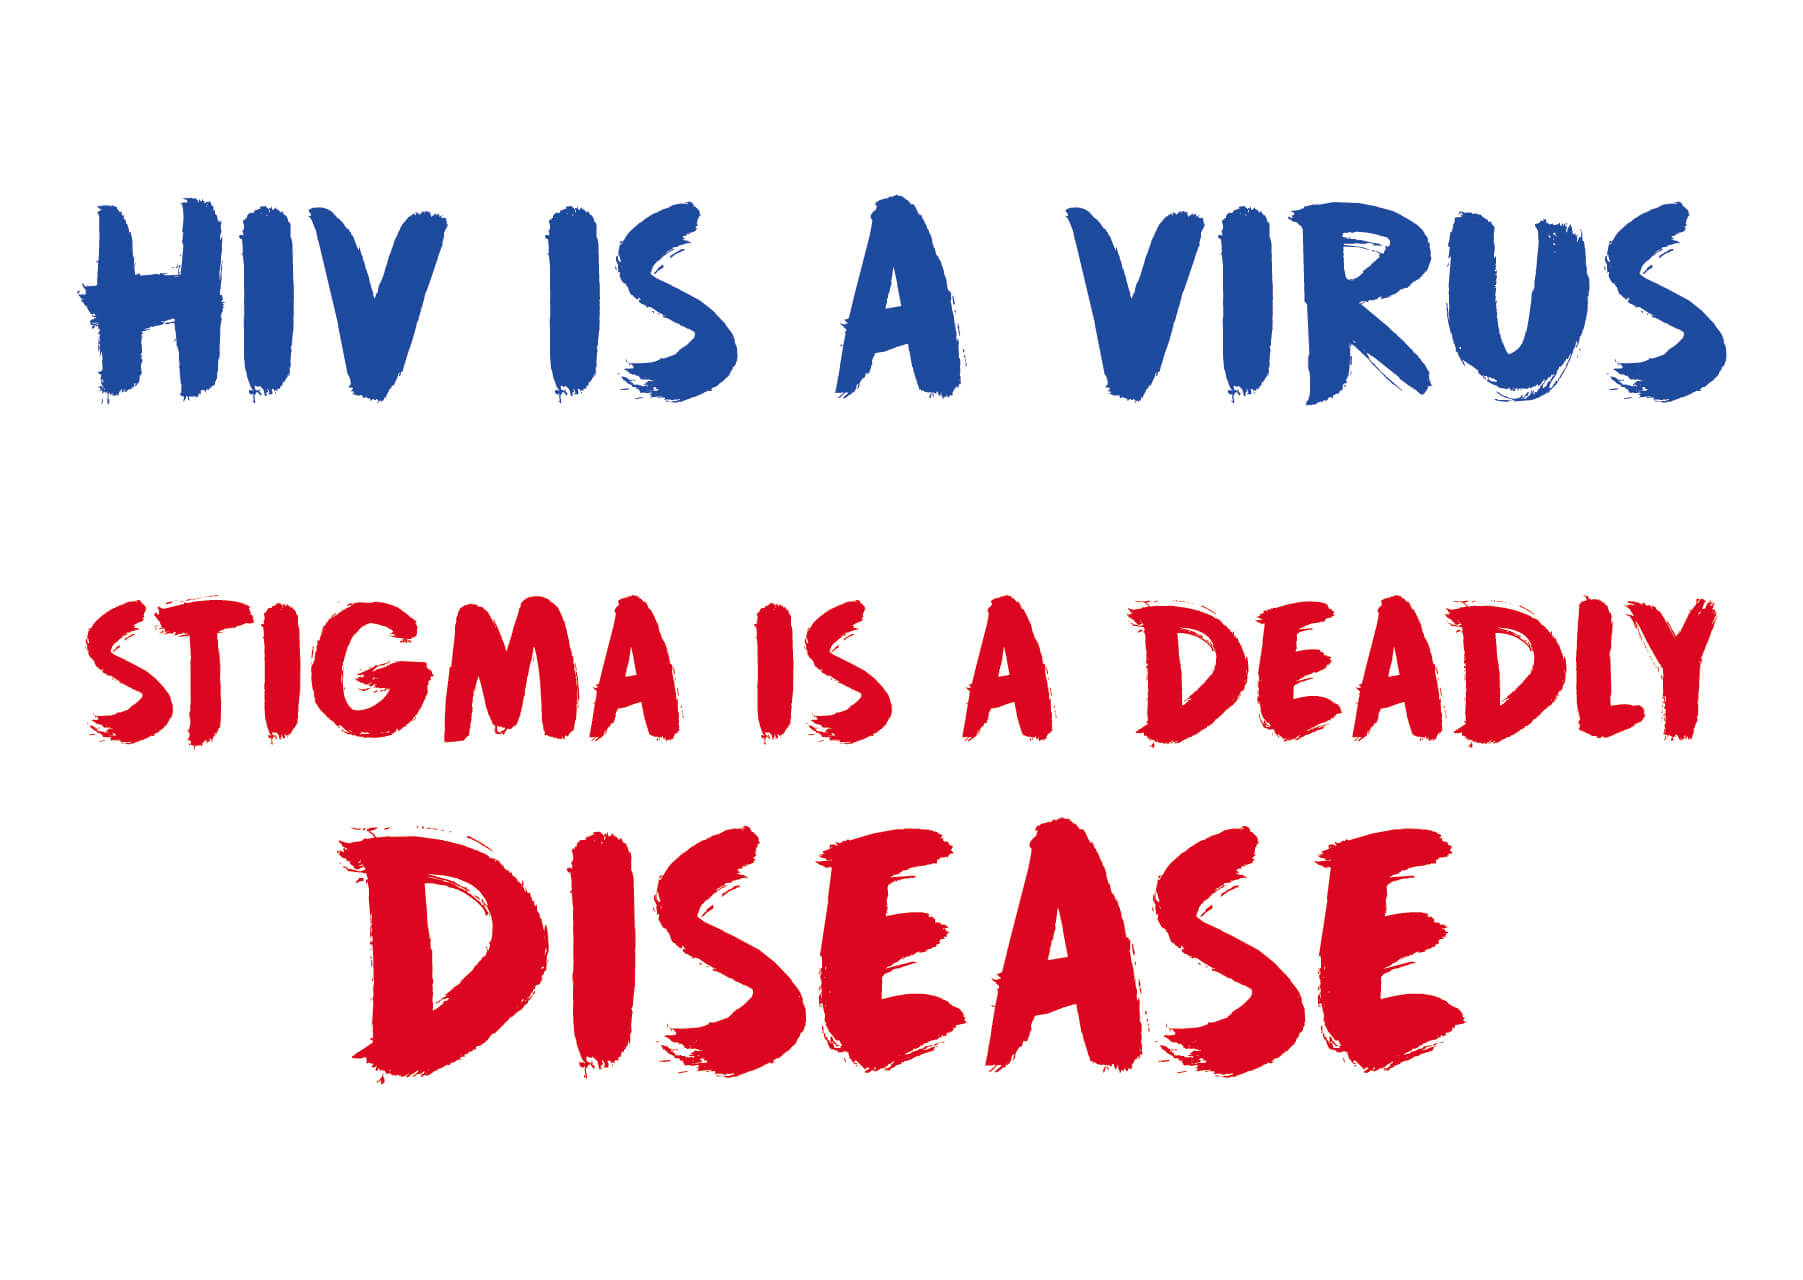 HIV is a virus stigma is a deadly disease